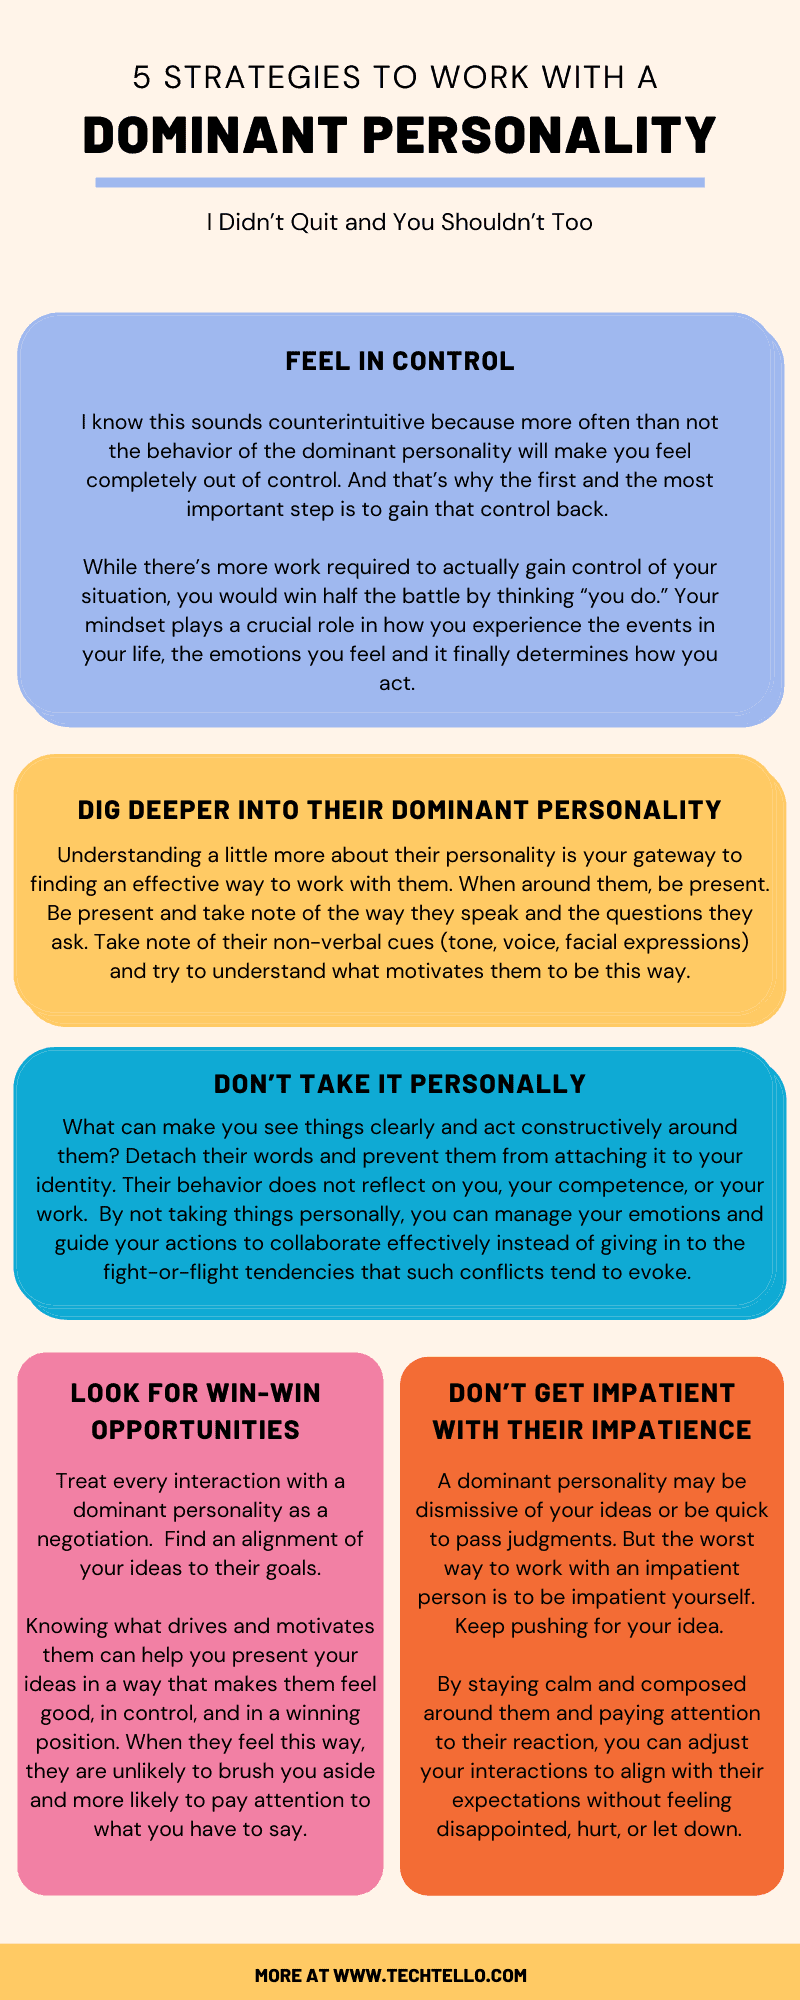 How to work with a dominant personality in your office